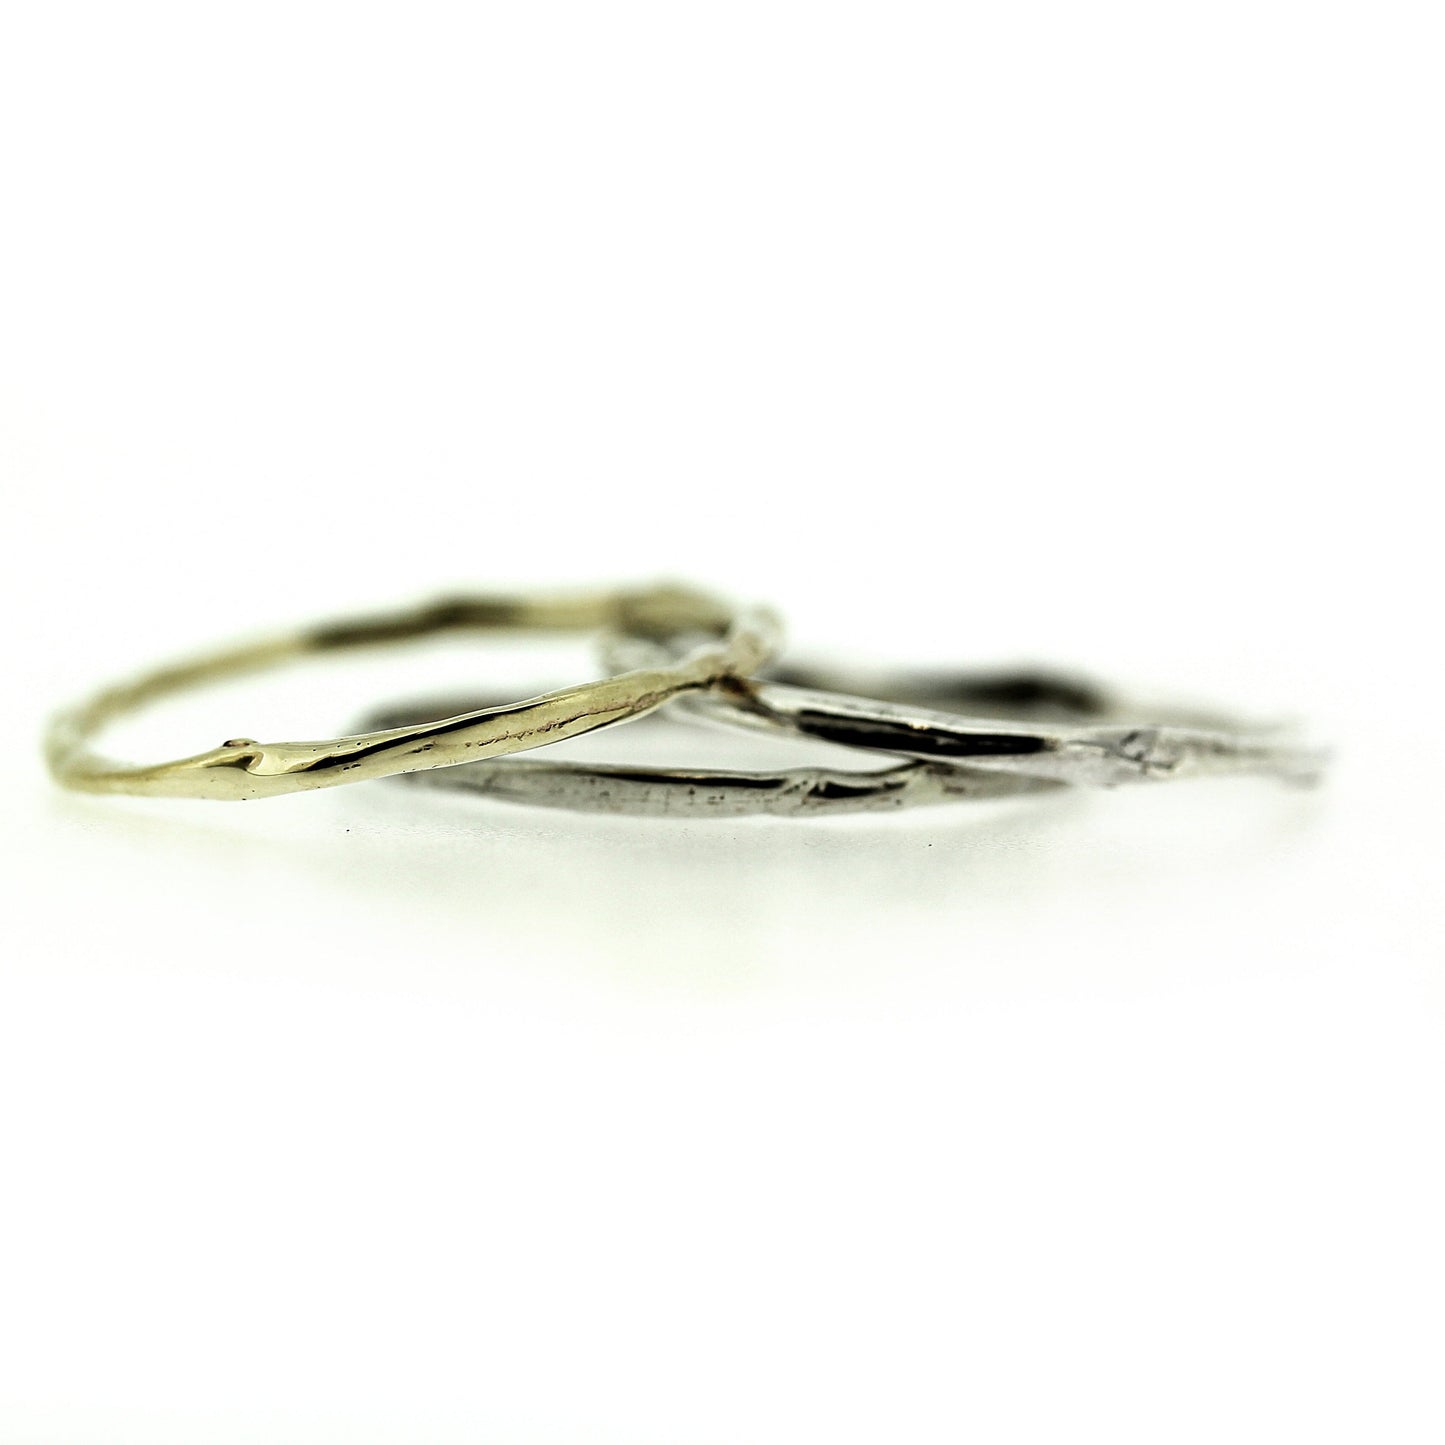 A set of three stackable rings all with the same organic texture, thin band and different colored metal.